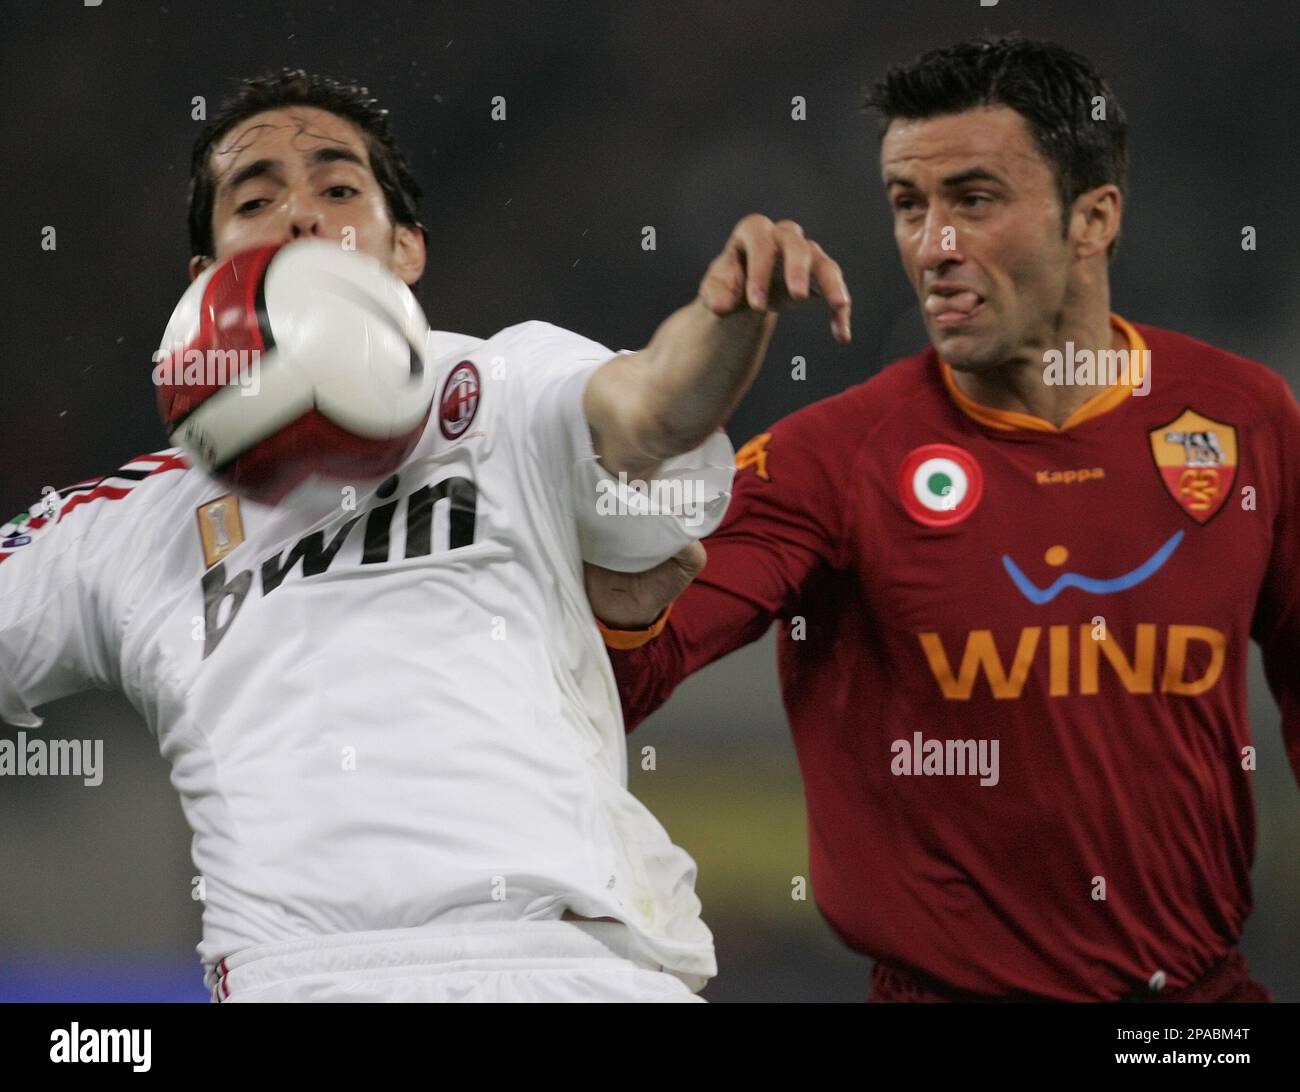 AS Roma's Cristian Panucci, right, and AC Milan's Kaka in action during the  Italian Serie A soccer match between AS Roma and AC Milan at Rome's Olympic  stadium, Saturday, March 15, 2008. (